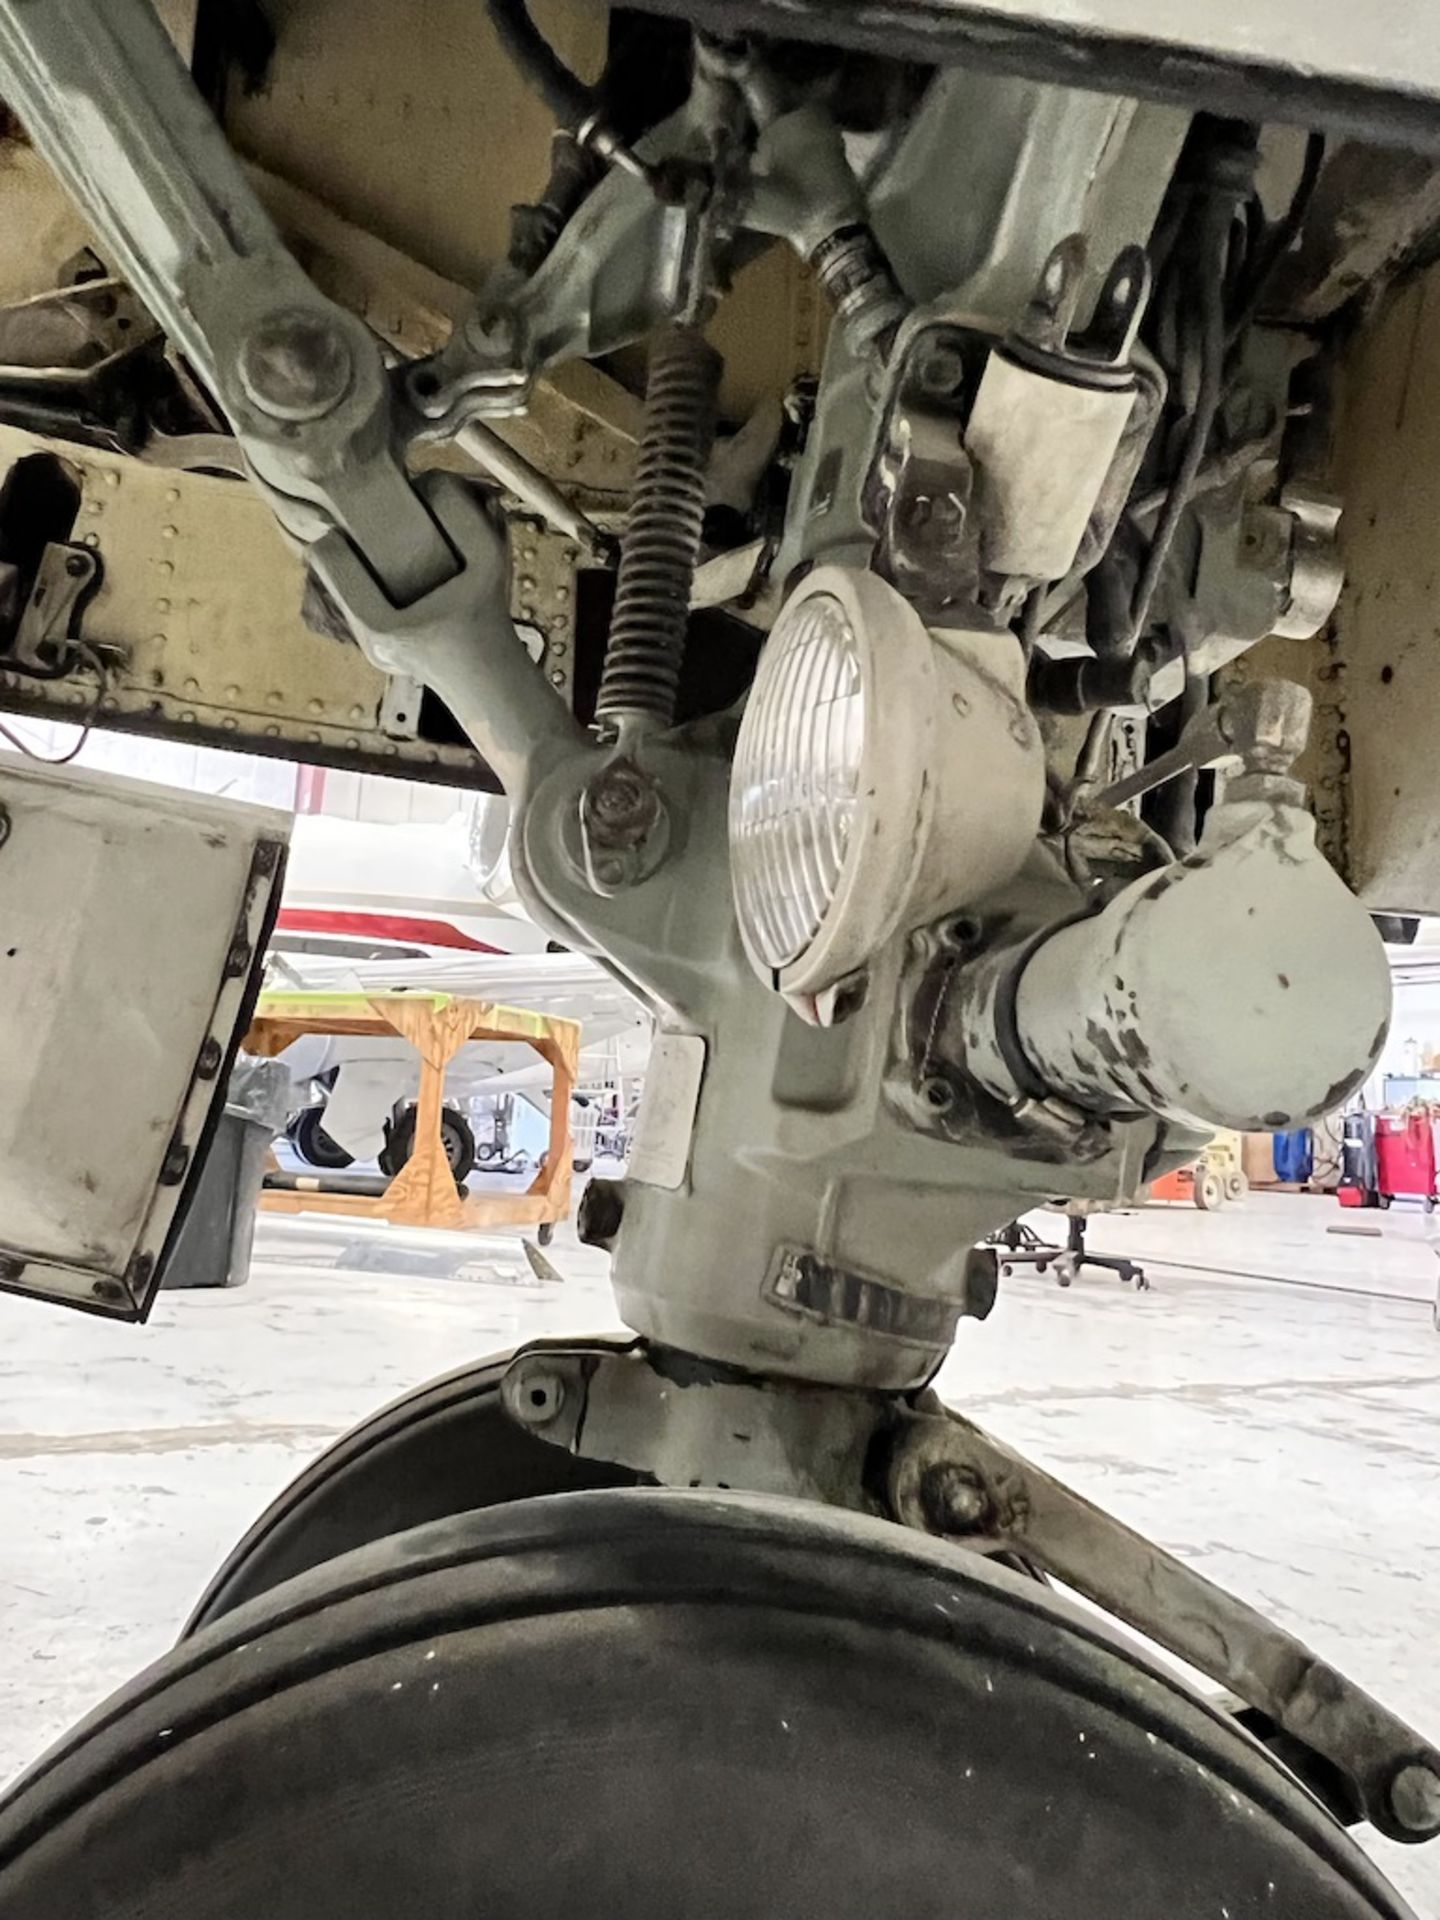 LOT OF: (1) SUN-AIR OF SCANDINAVIA NOSE WHEEL STRUT W/ BRAKES AND TIRES FROM A FAIRCHILD DORNIER 328 - Image 6 of 6